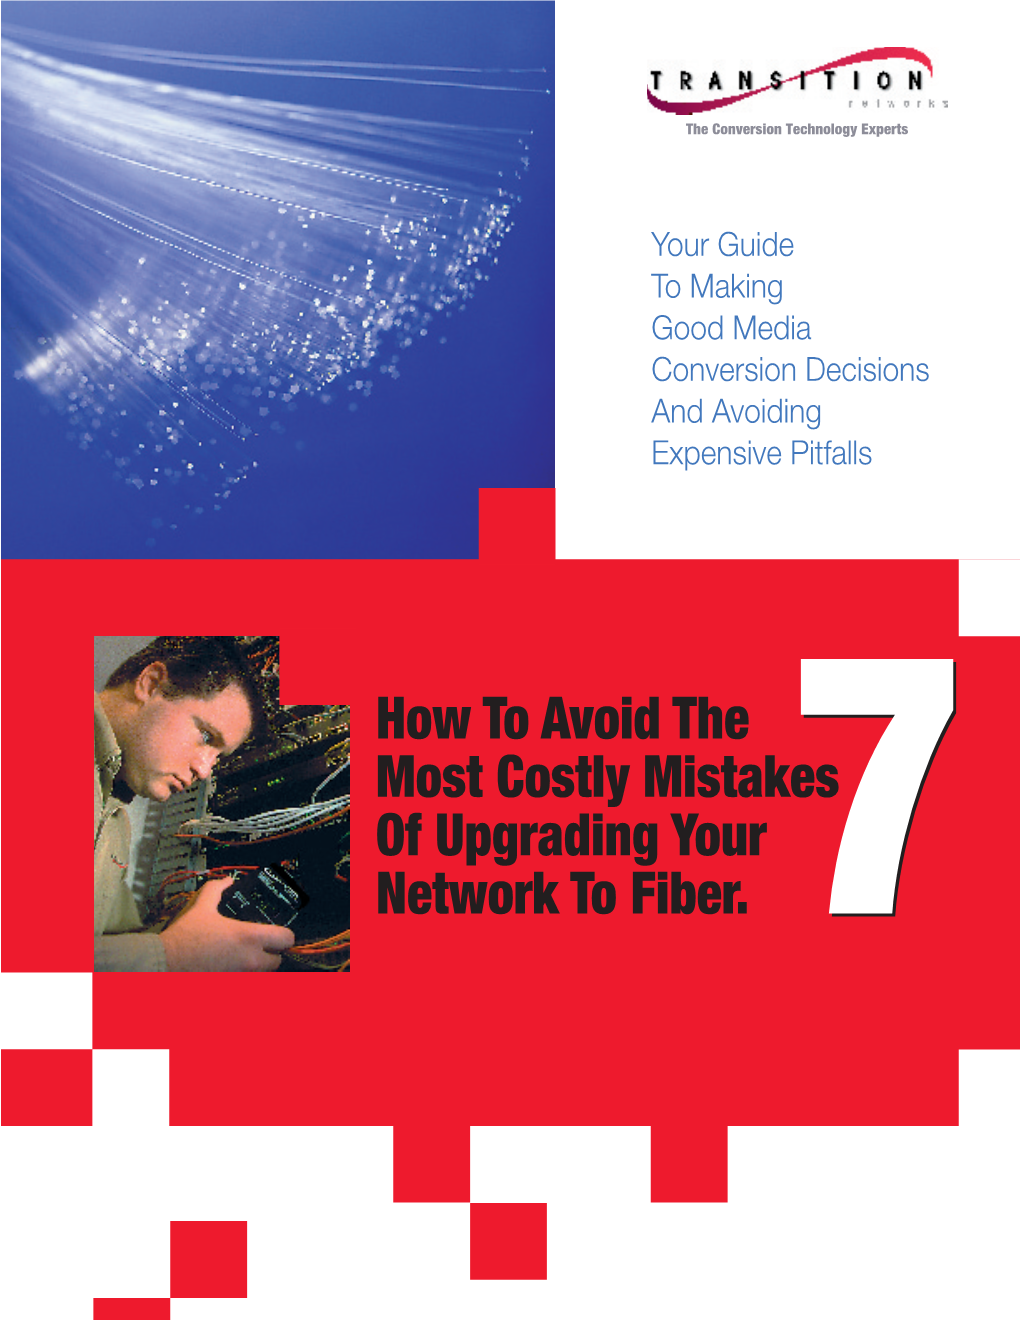 How to Avoid the Most Costly Mistakes of Upgrading Your Network to Fiber